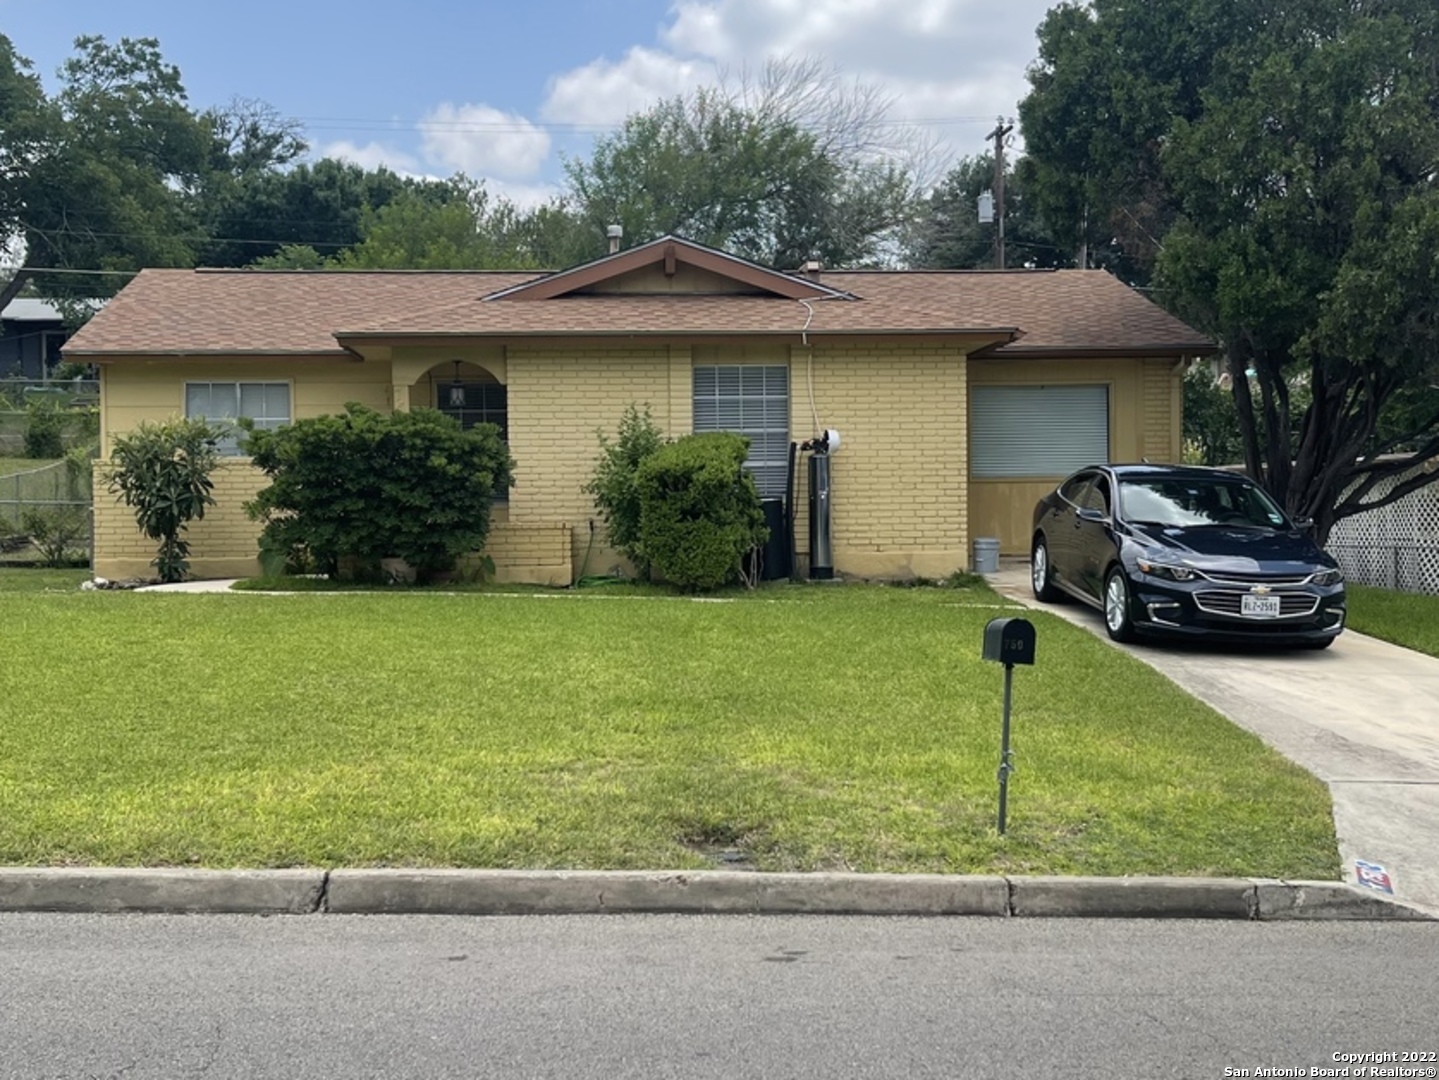 This beautiful home is located at the heart of San Antonio, nestled conveniently between Downtown San Antonio and the Medical center area.  This home has recently received new interier paint and has been well kept.  Also has a large backyard.  Will not last long.